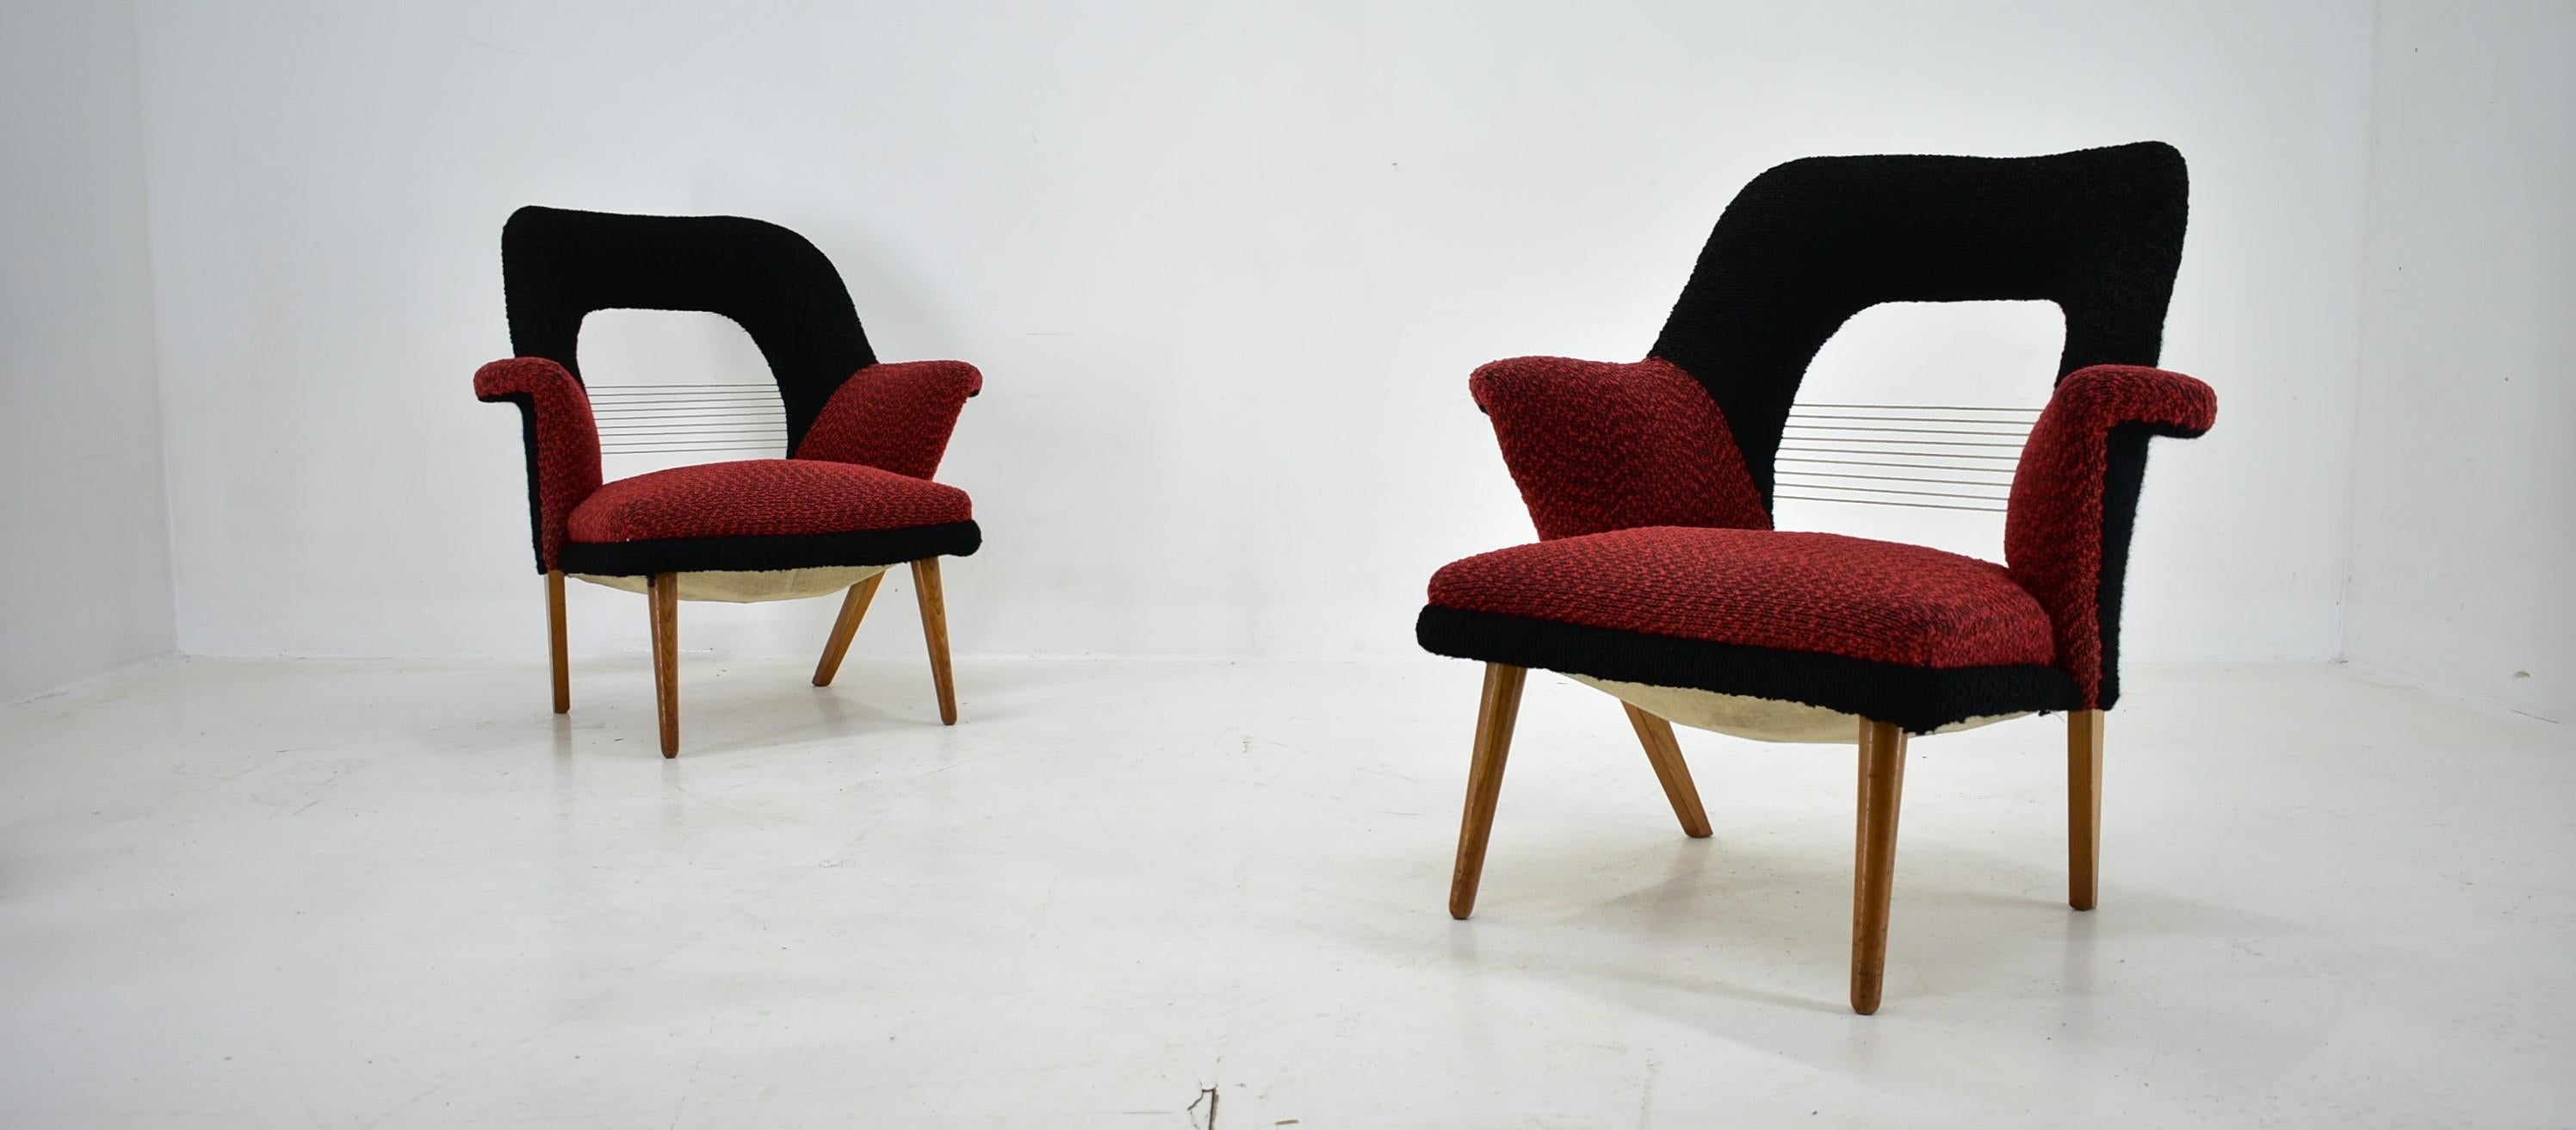 Midcentury Armchairs Designed by Miroslav Navrátil, 1969s For Sale 6